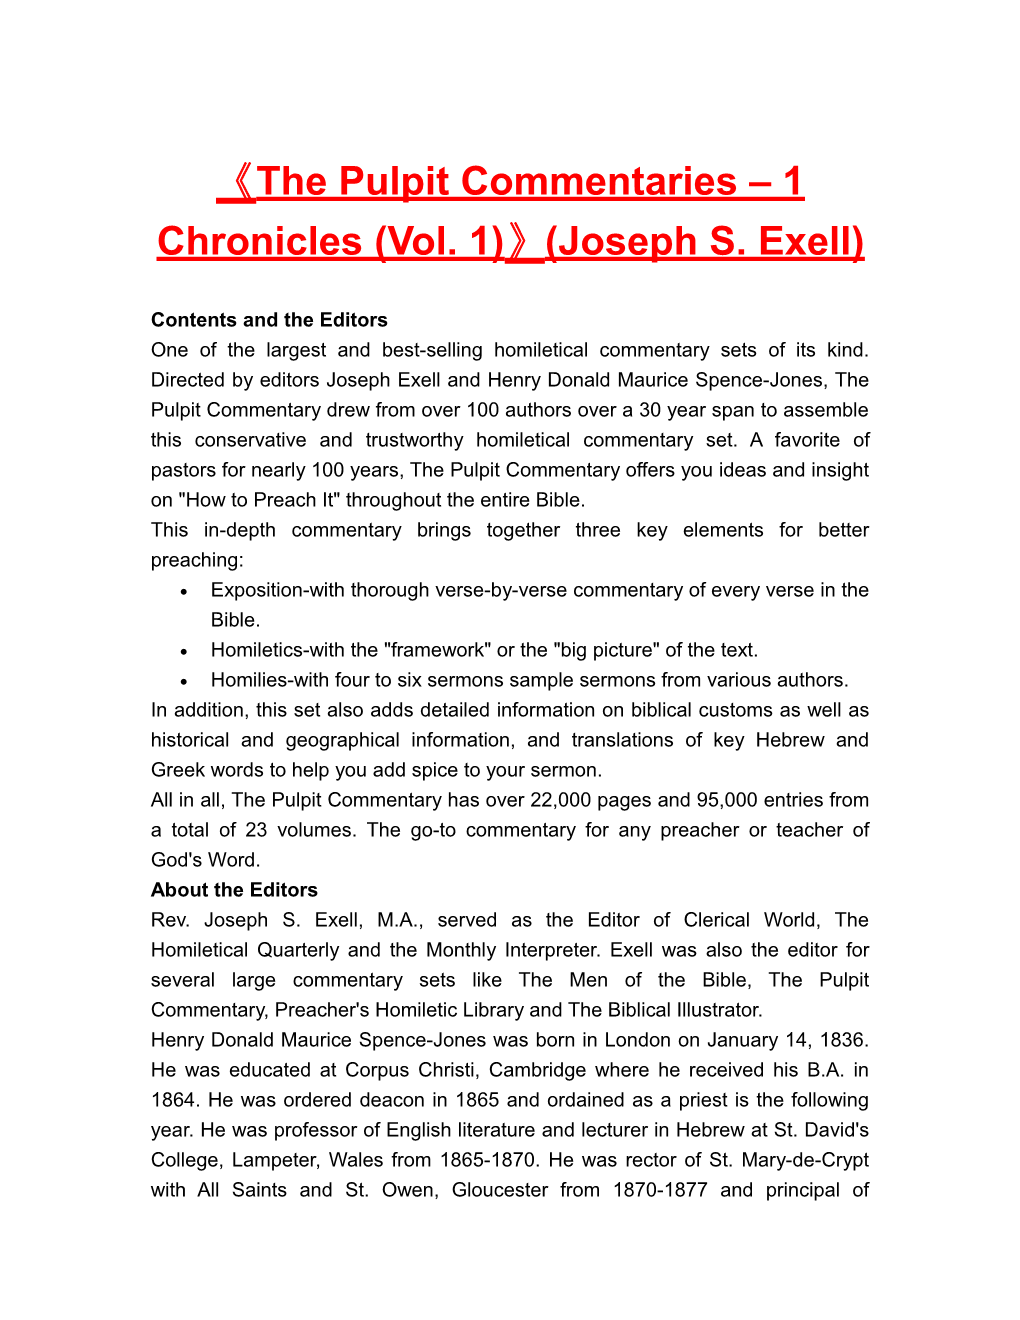 The Pulpit Commentaries 1 Chronicles (Vol. 1) (Joseph S. Exell)